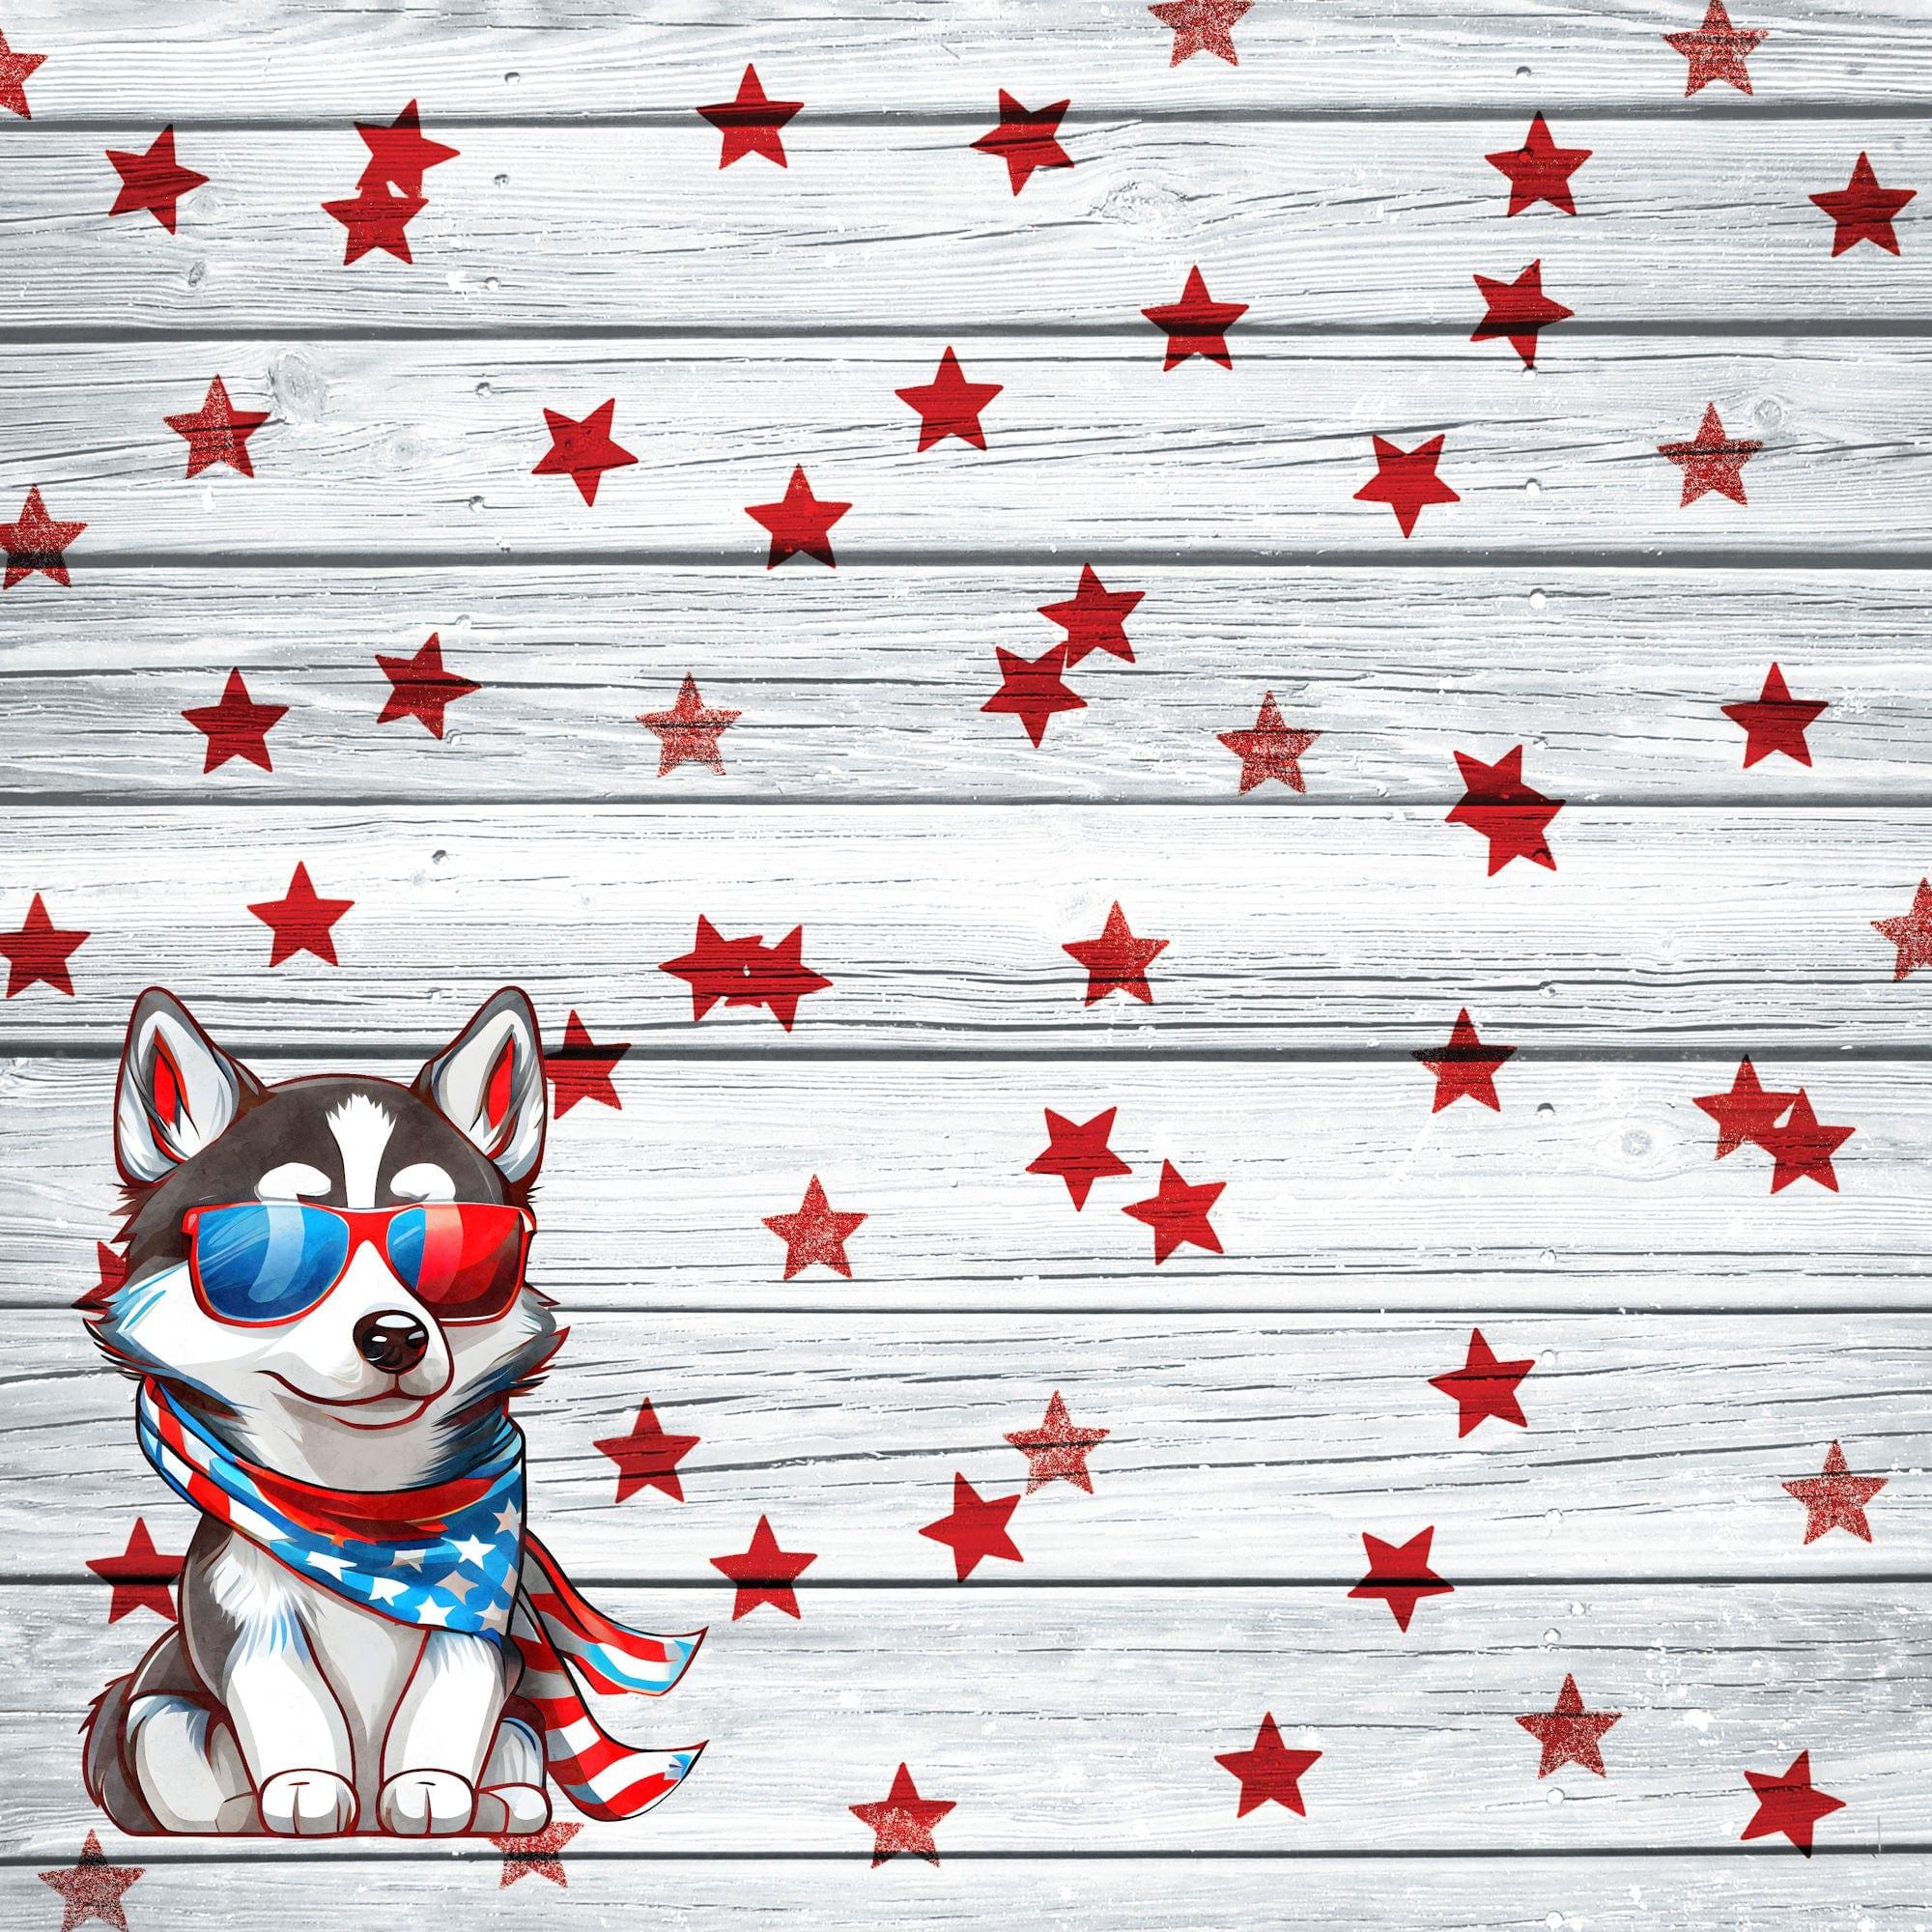 Patriotic Pups Collection Siberian Husky 12 x 12 Double-Sided Scrapbook Paper by SSC Designs - Scrapbook Supply Companies